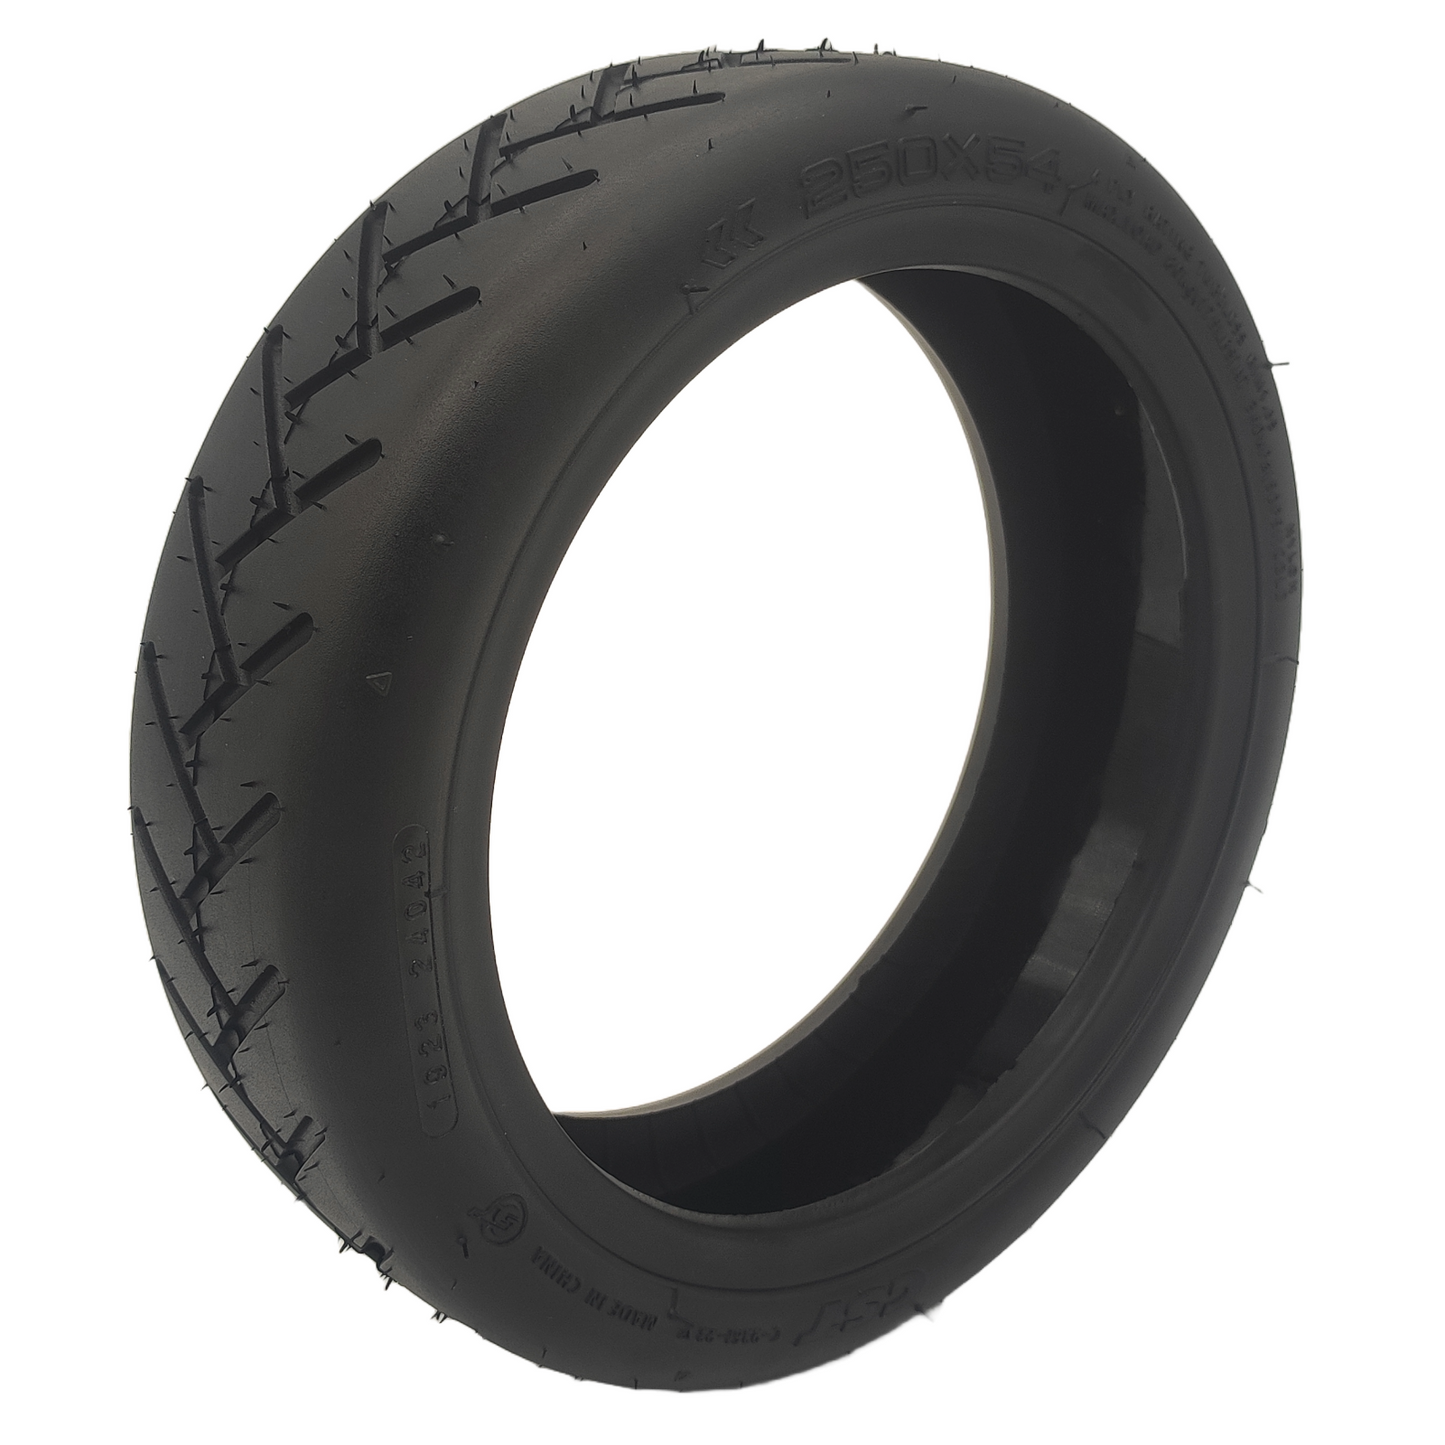 250x54 CST tire tubeless with gel layer